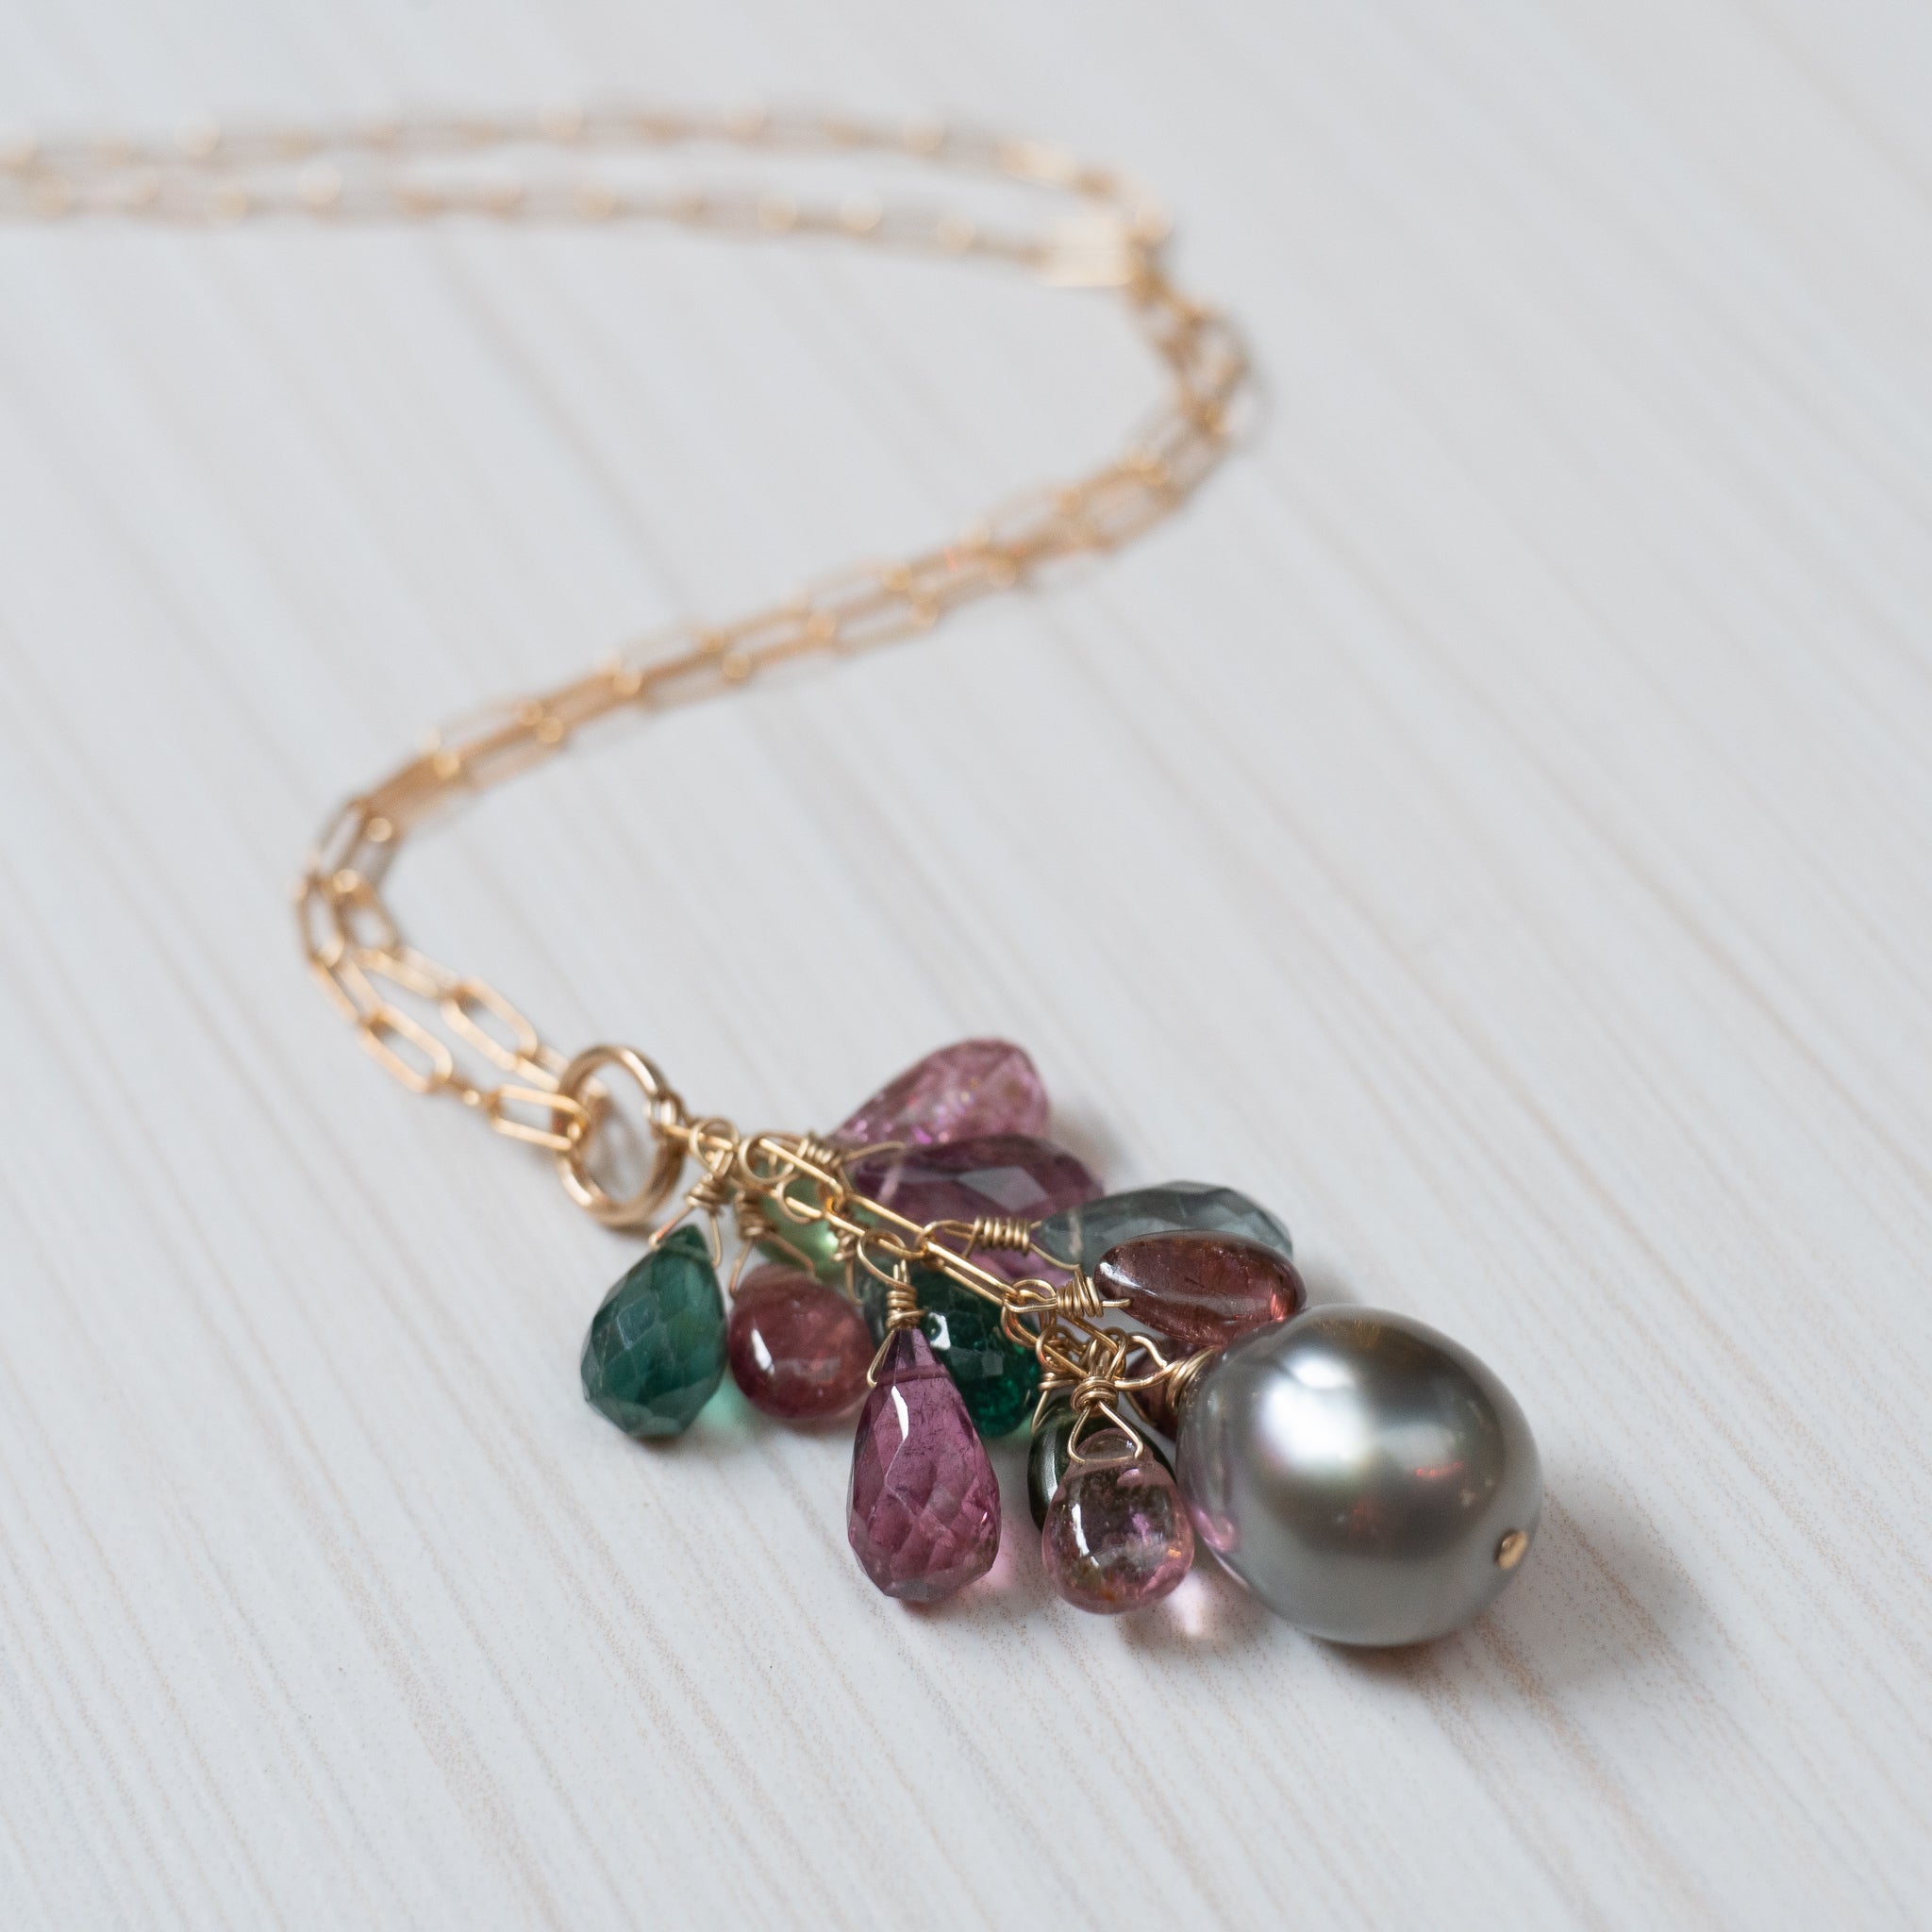 tahitian pearl and Tourmaline necklace, handmade in Hawaii by eve black jewelry